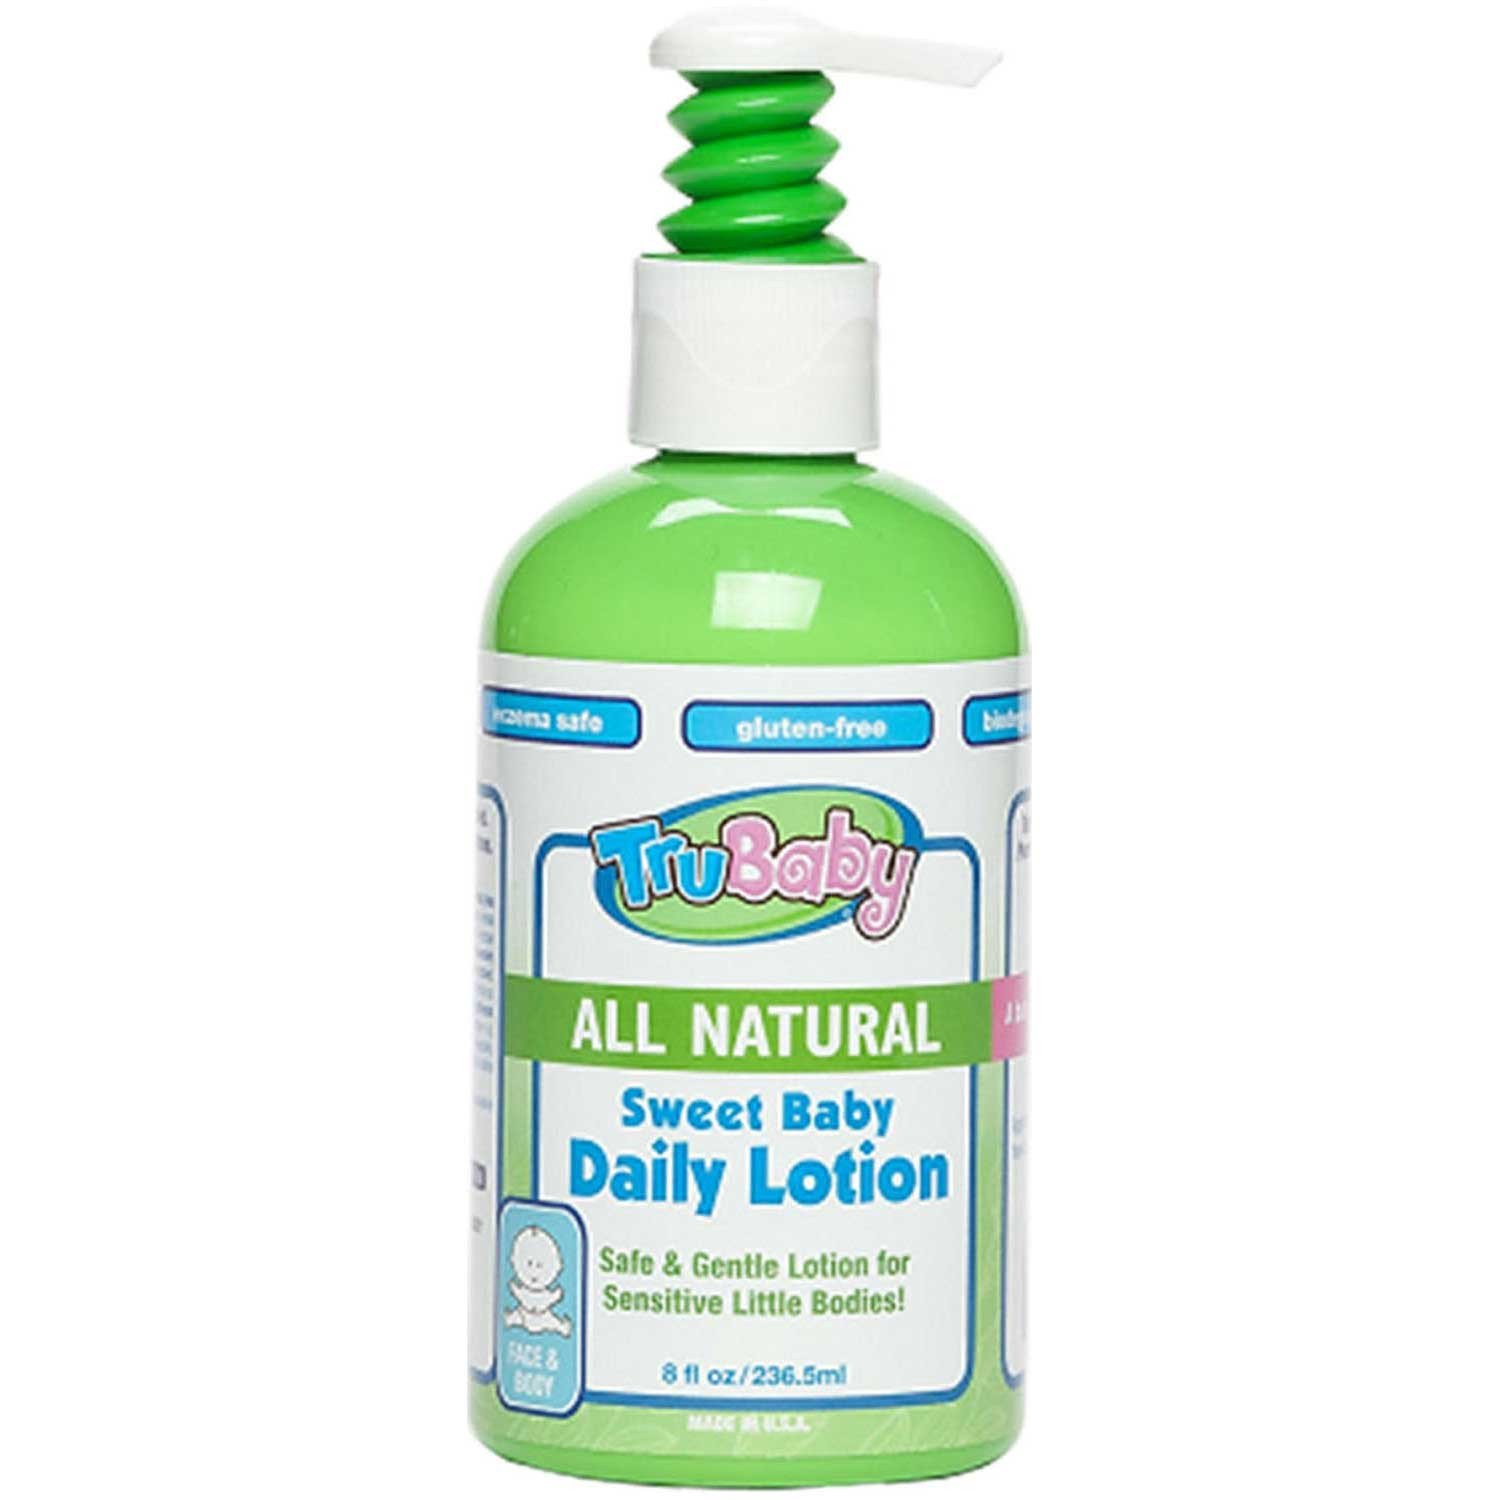 TruBaby Sweet Baby Daily Lotion, 236.5 ml